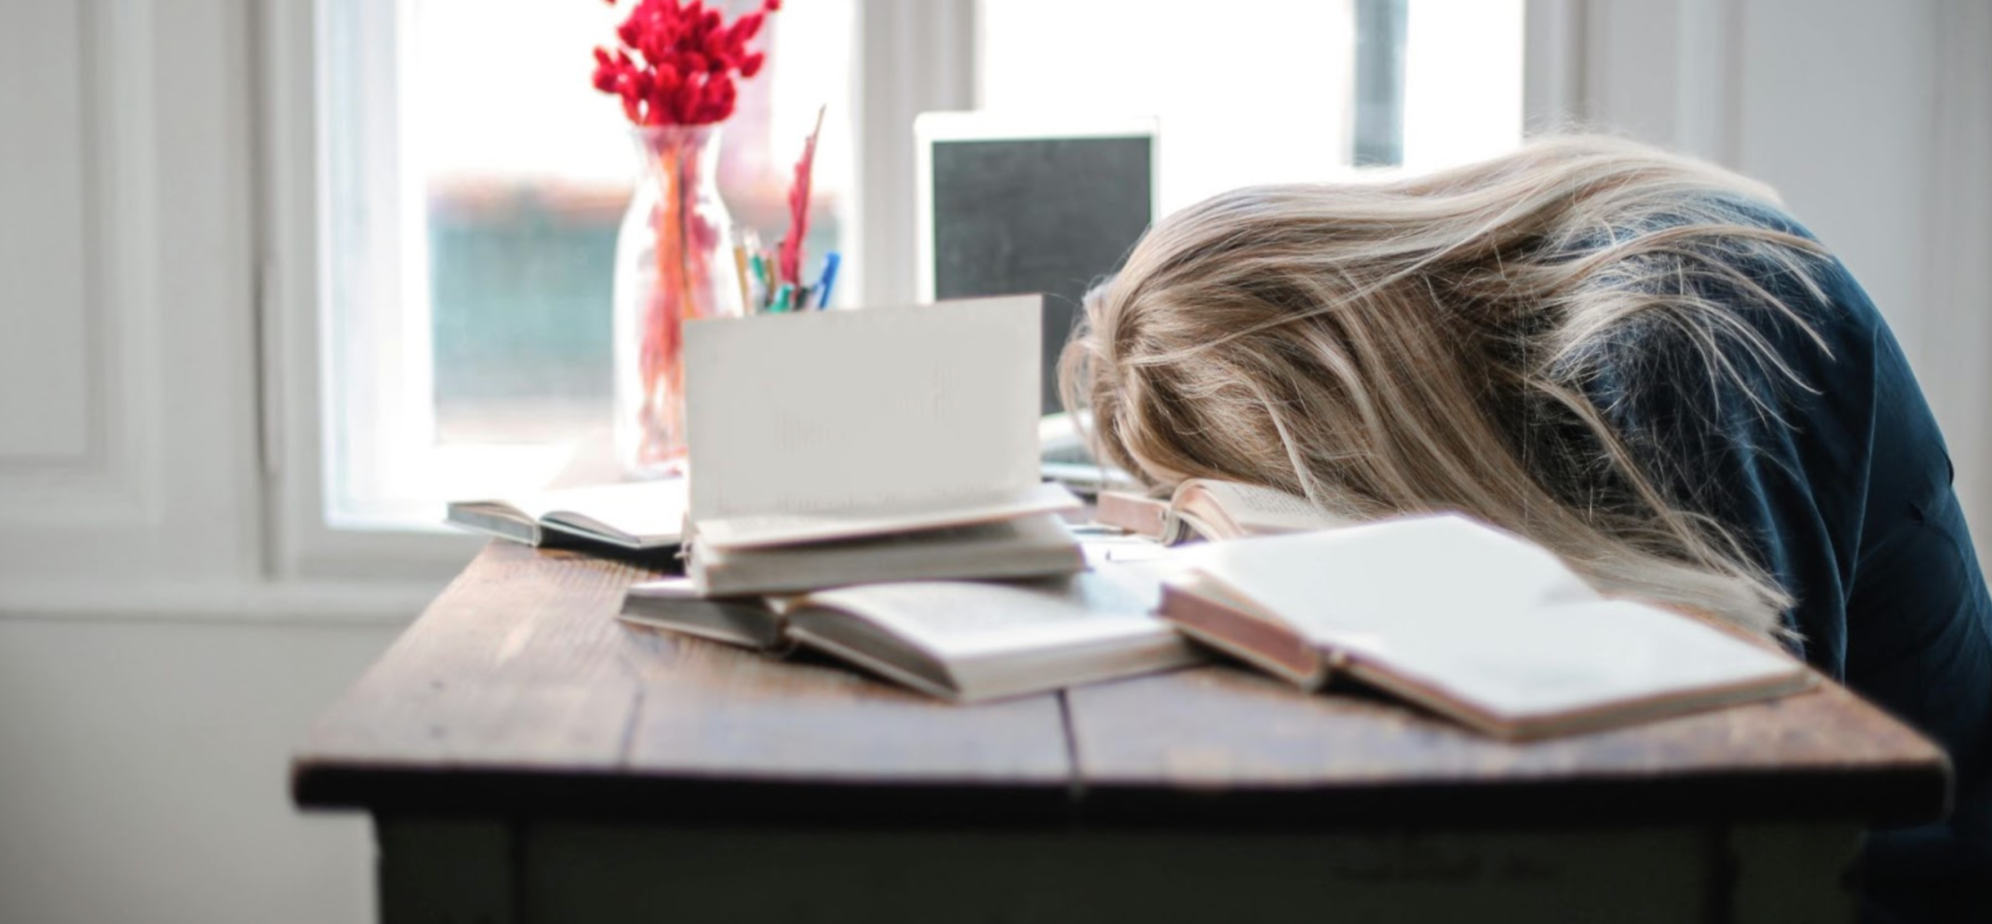 Tired woman sleeping with her head on her desk